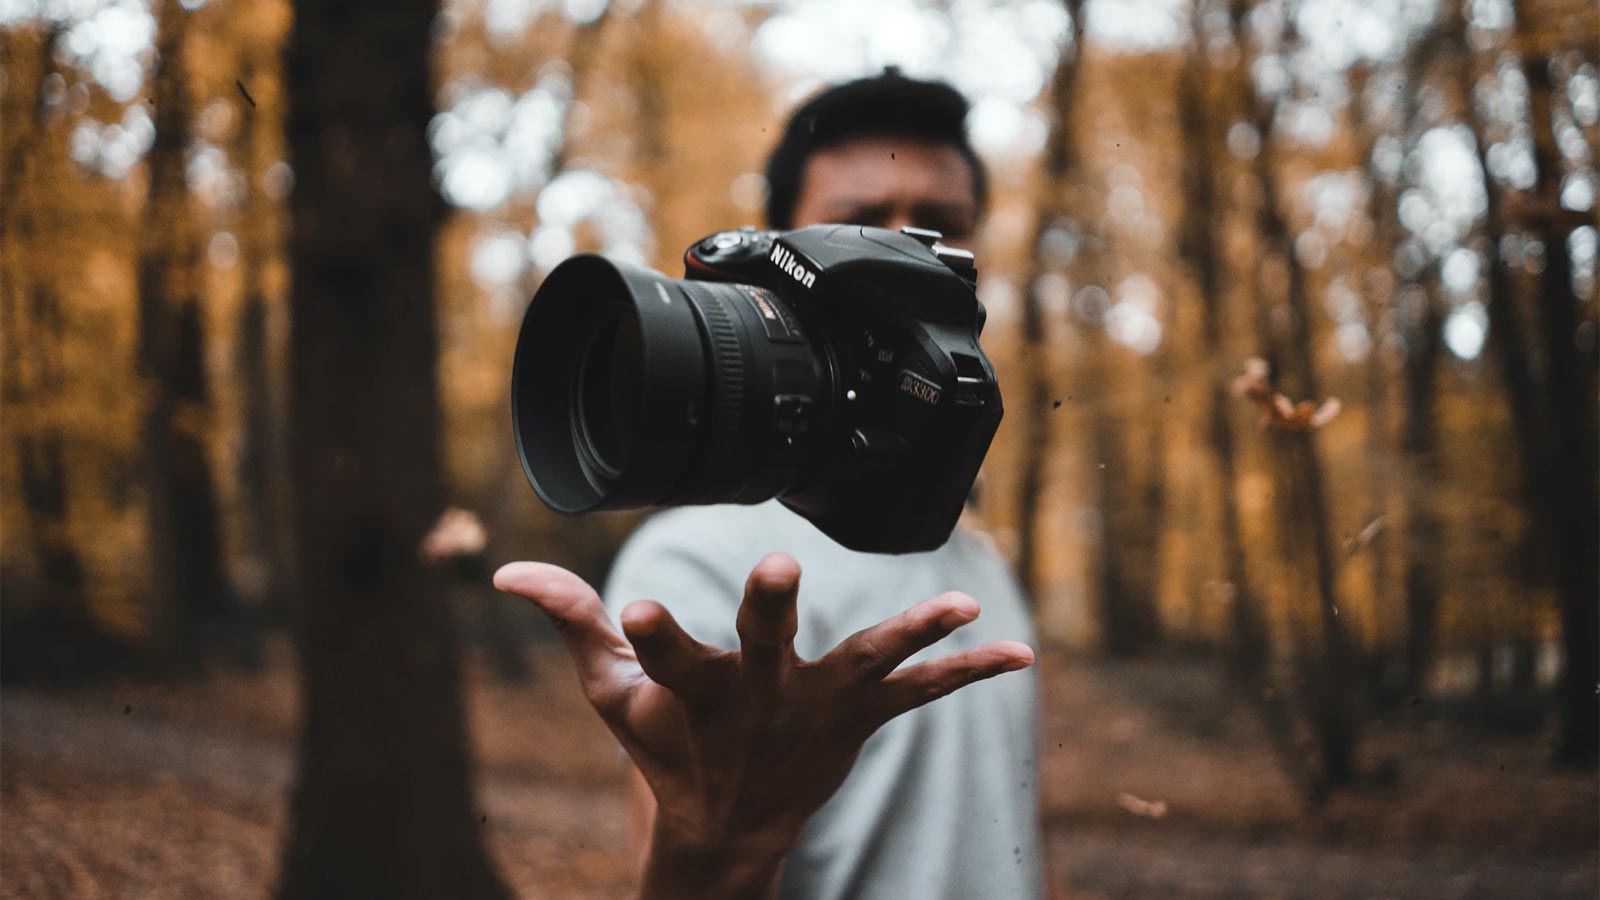 How to Develop Your Photography Skills